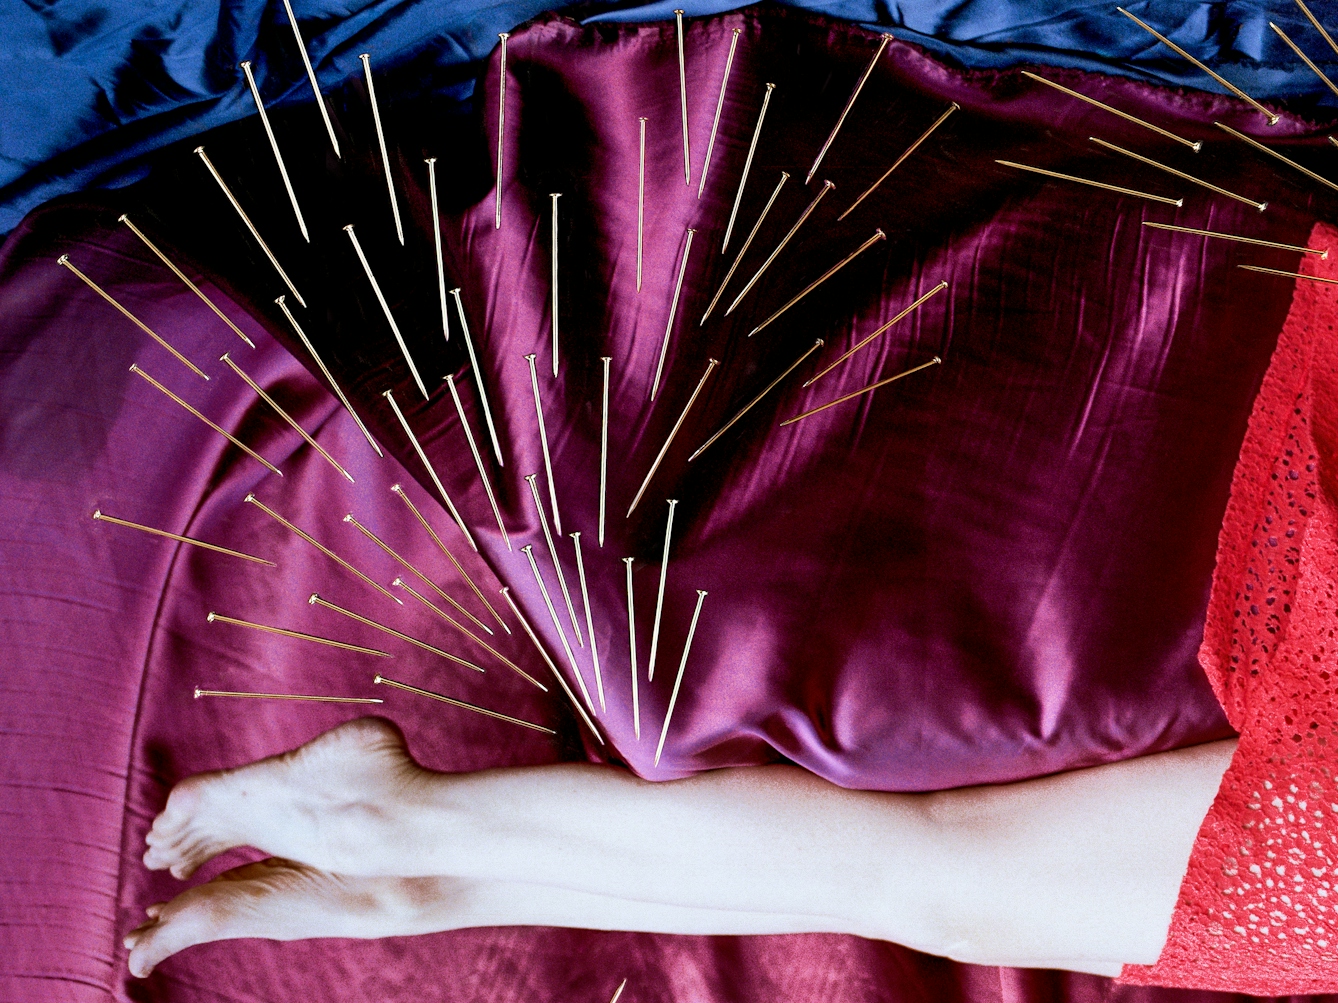 Detail from a larger artwork created with a colour photographic print of a female figure in a bright red dress, set against a purple and blue draped silk background. She is lying horizontally in the frame, face down, caught as if in mid fall. Her body is surrounded by groups of dress pins, laid on top of the photographic print. The pins are arranged as if they are a flight of arrows directed at her body. One group attacks her legs from above.